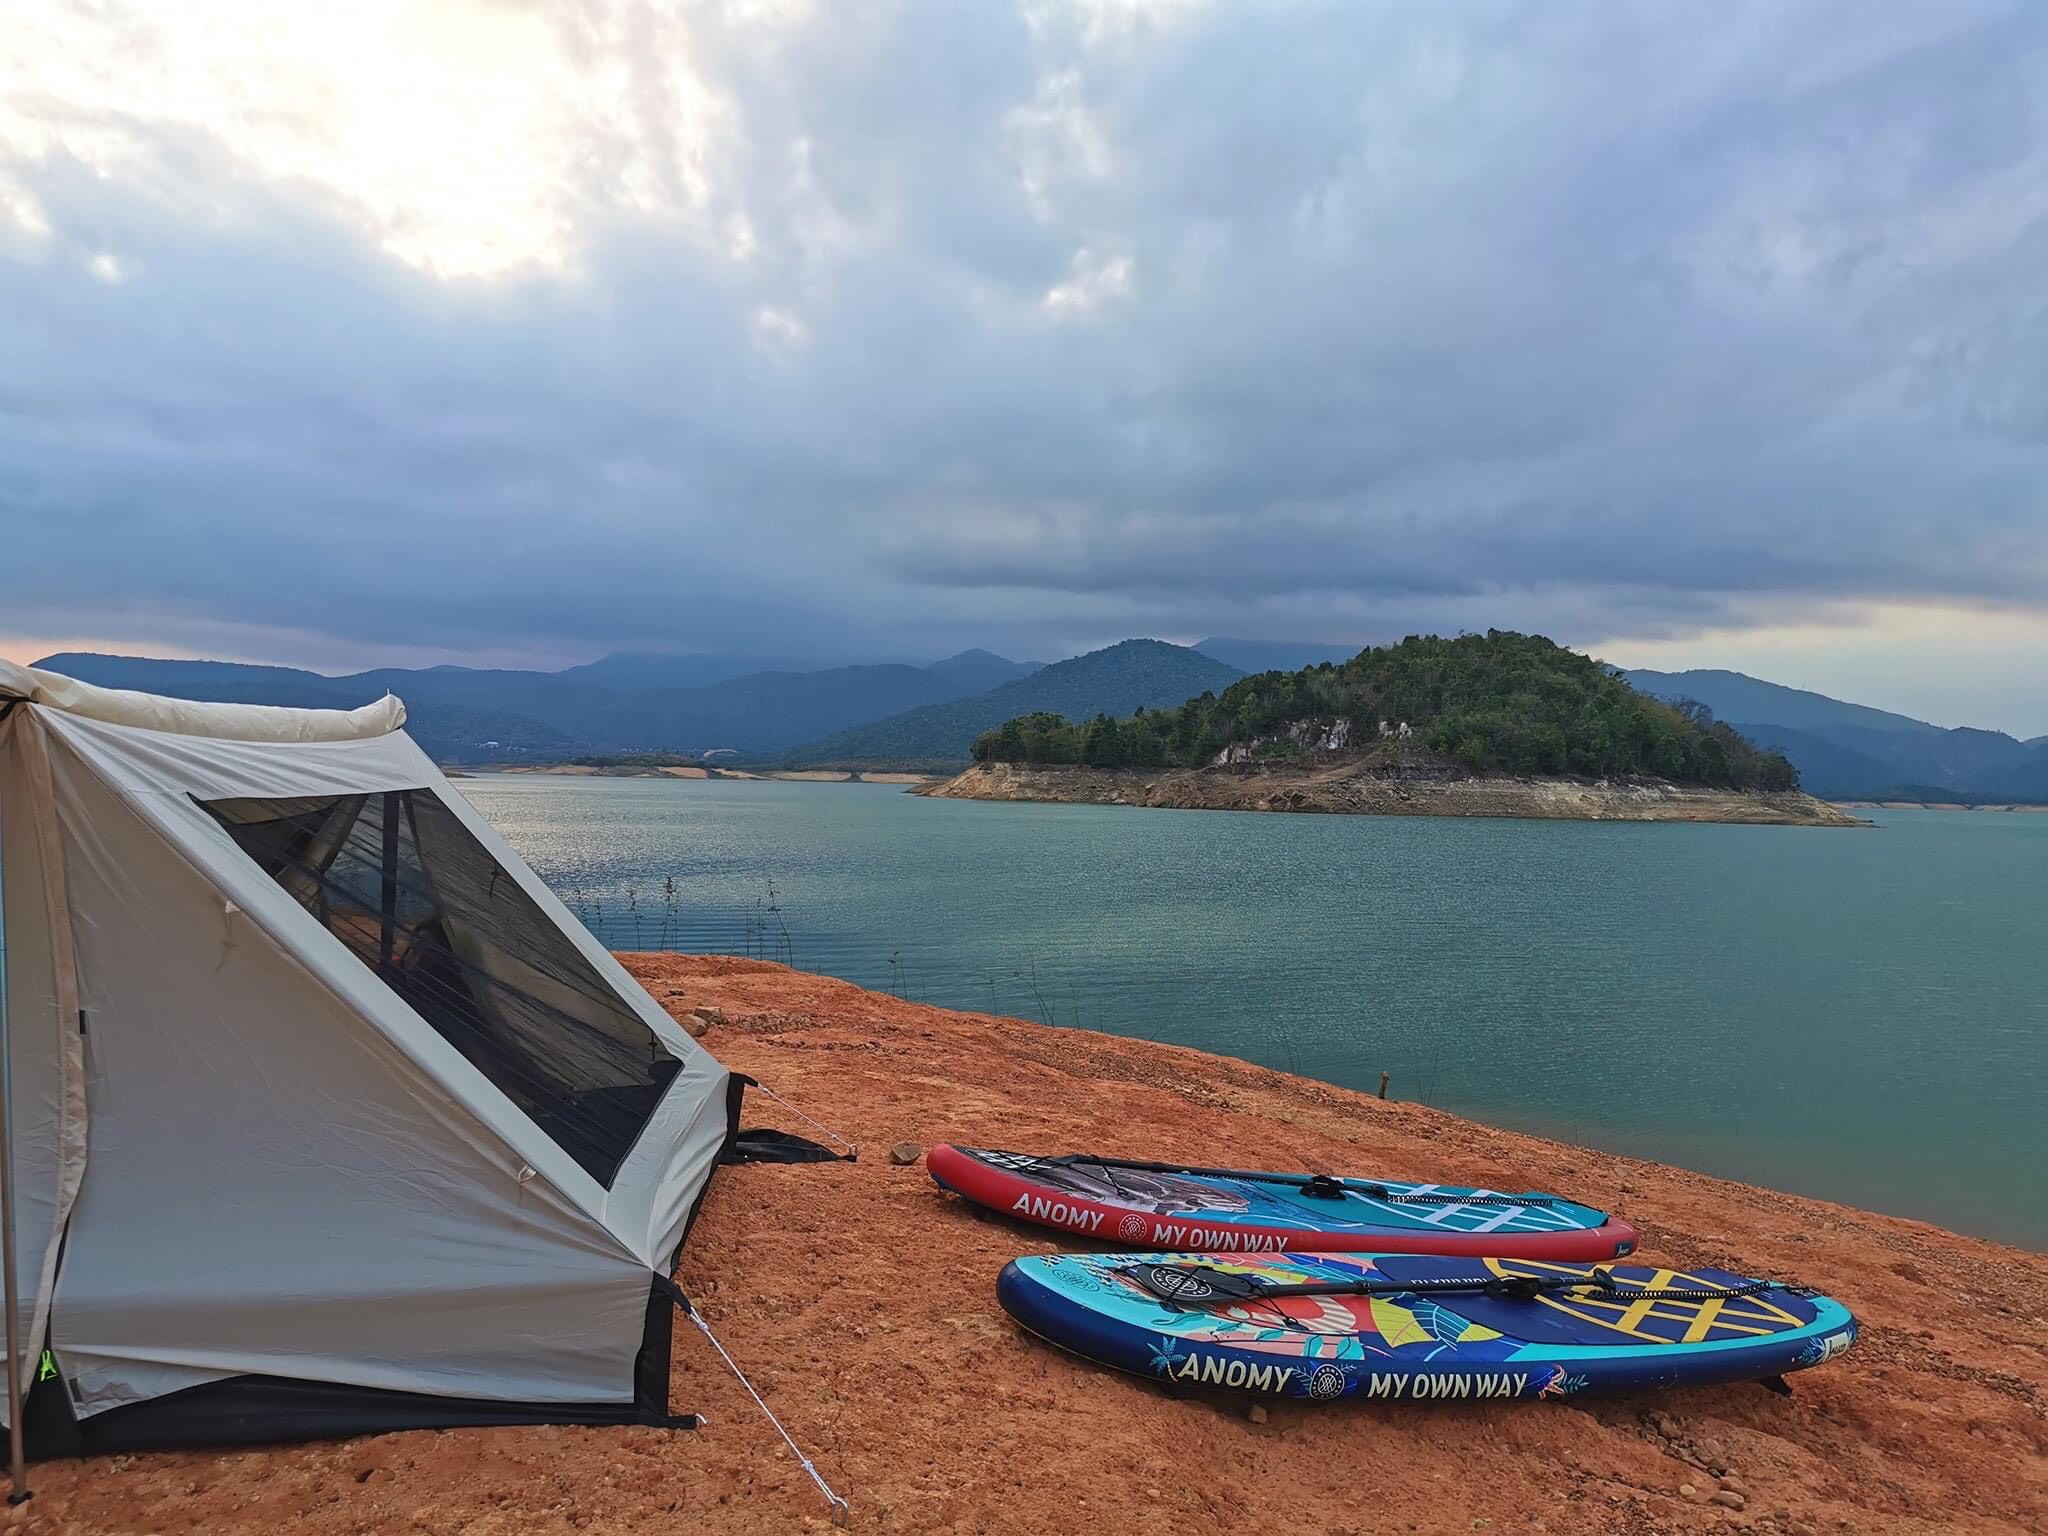 Boards are placed next to a tent in Vietnam. Photo: Ho Ka / Tuoi Tre